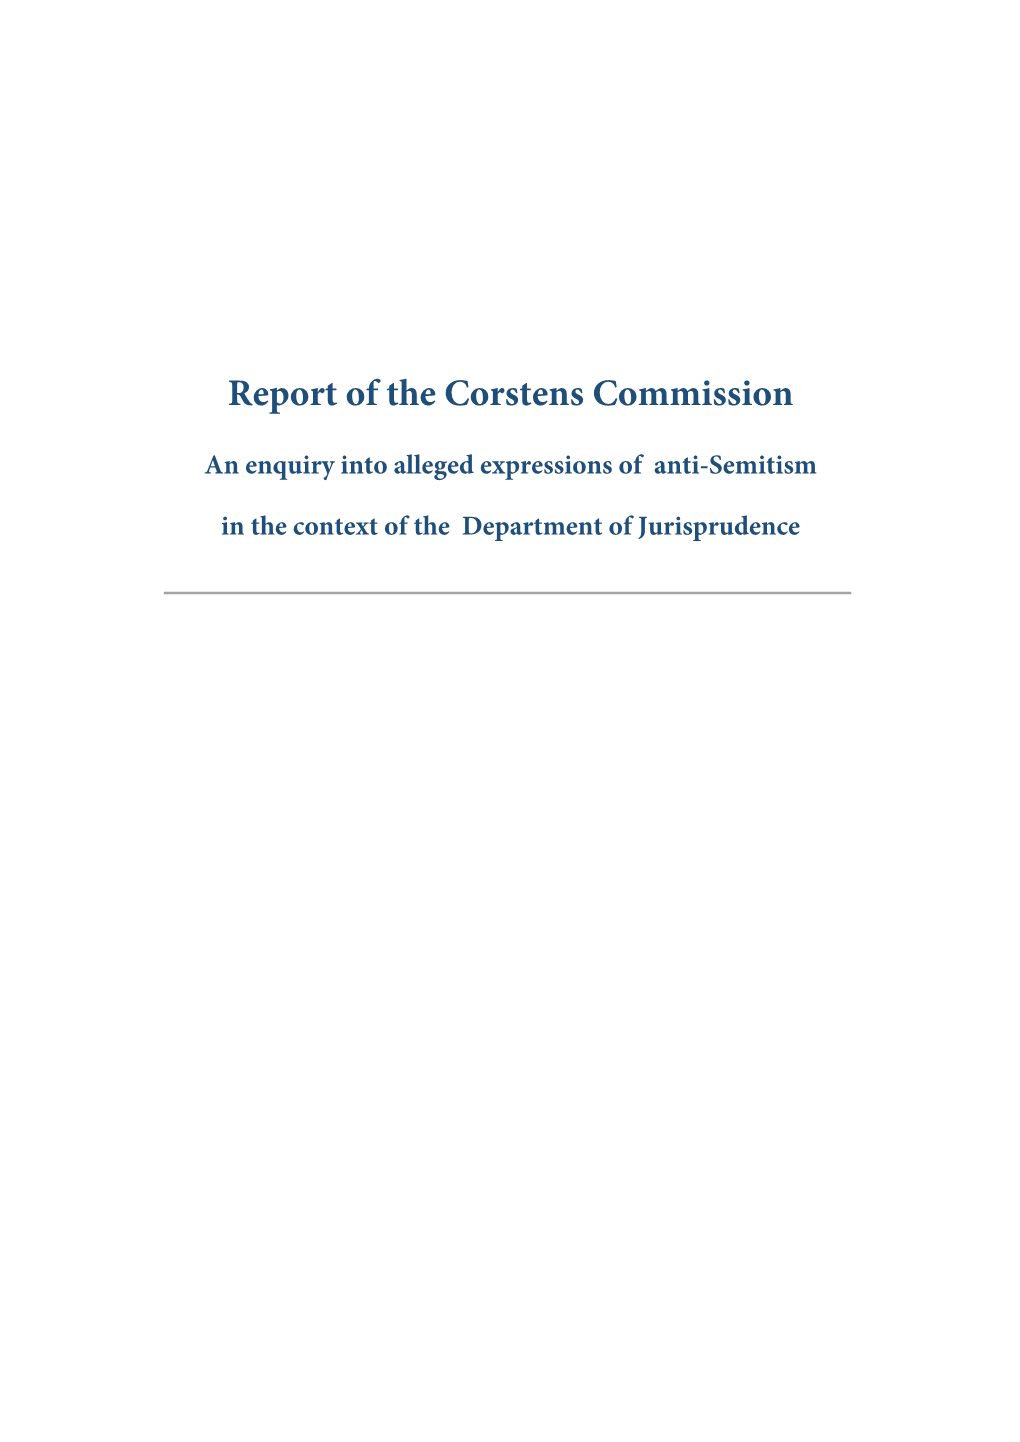 Report of the Corstens Commission